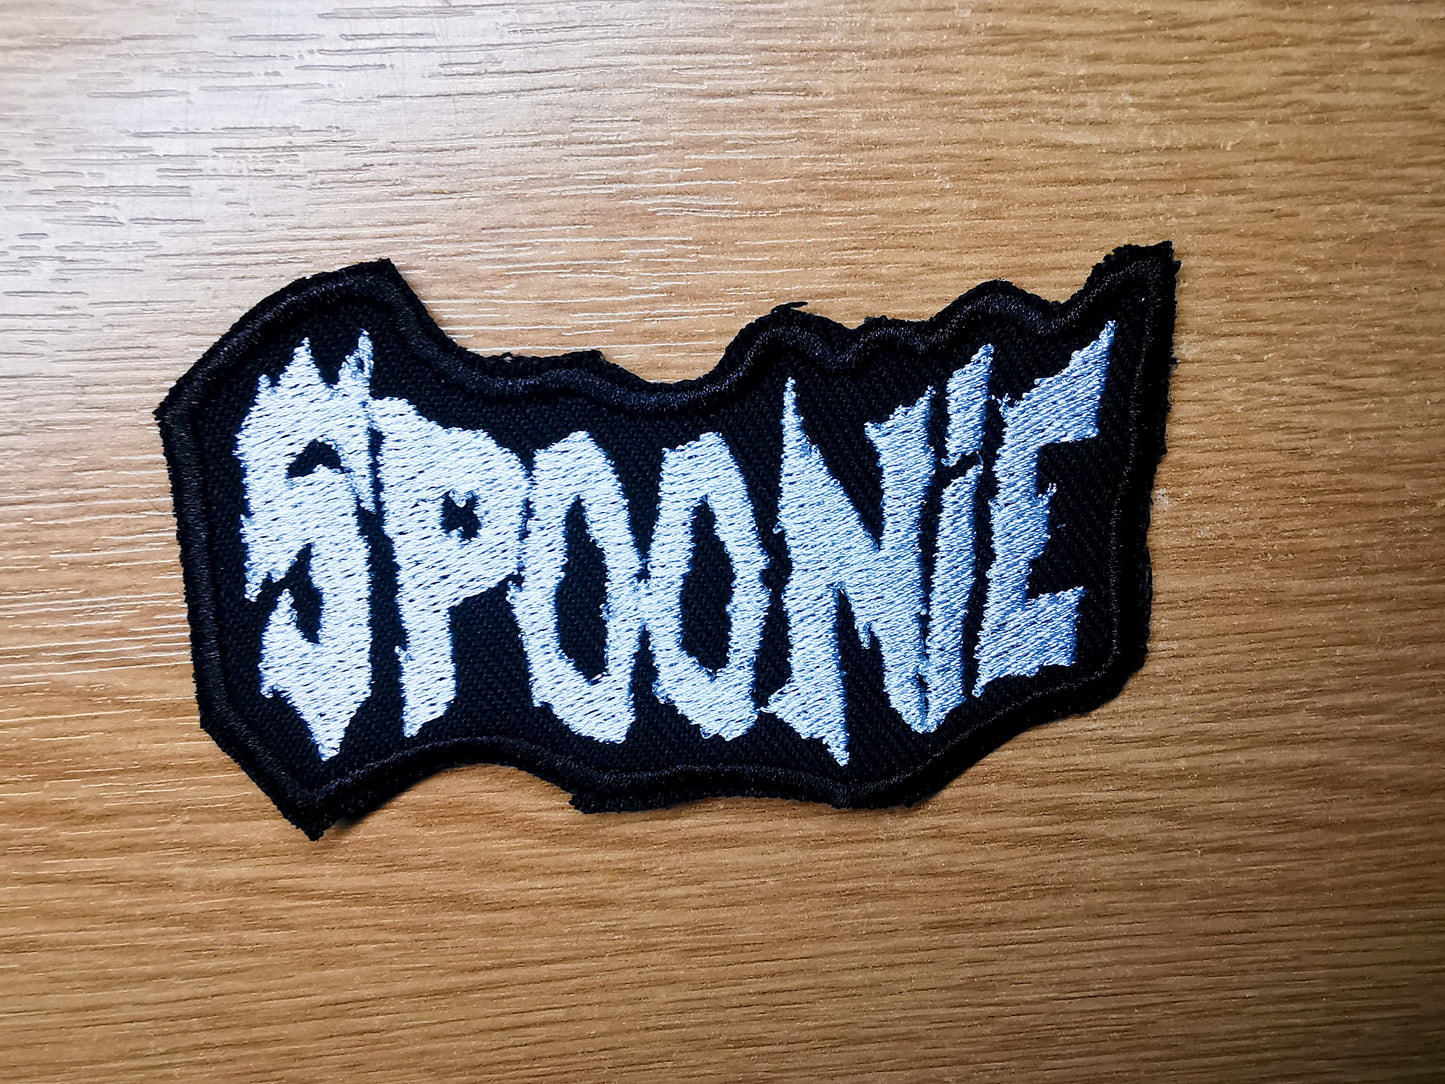 Spoonie Death Metal Iron On Embroidered Patch Spoon Theory Invisible Disability EDS or Fibromyalgia Autism Black Metal